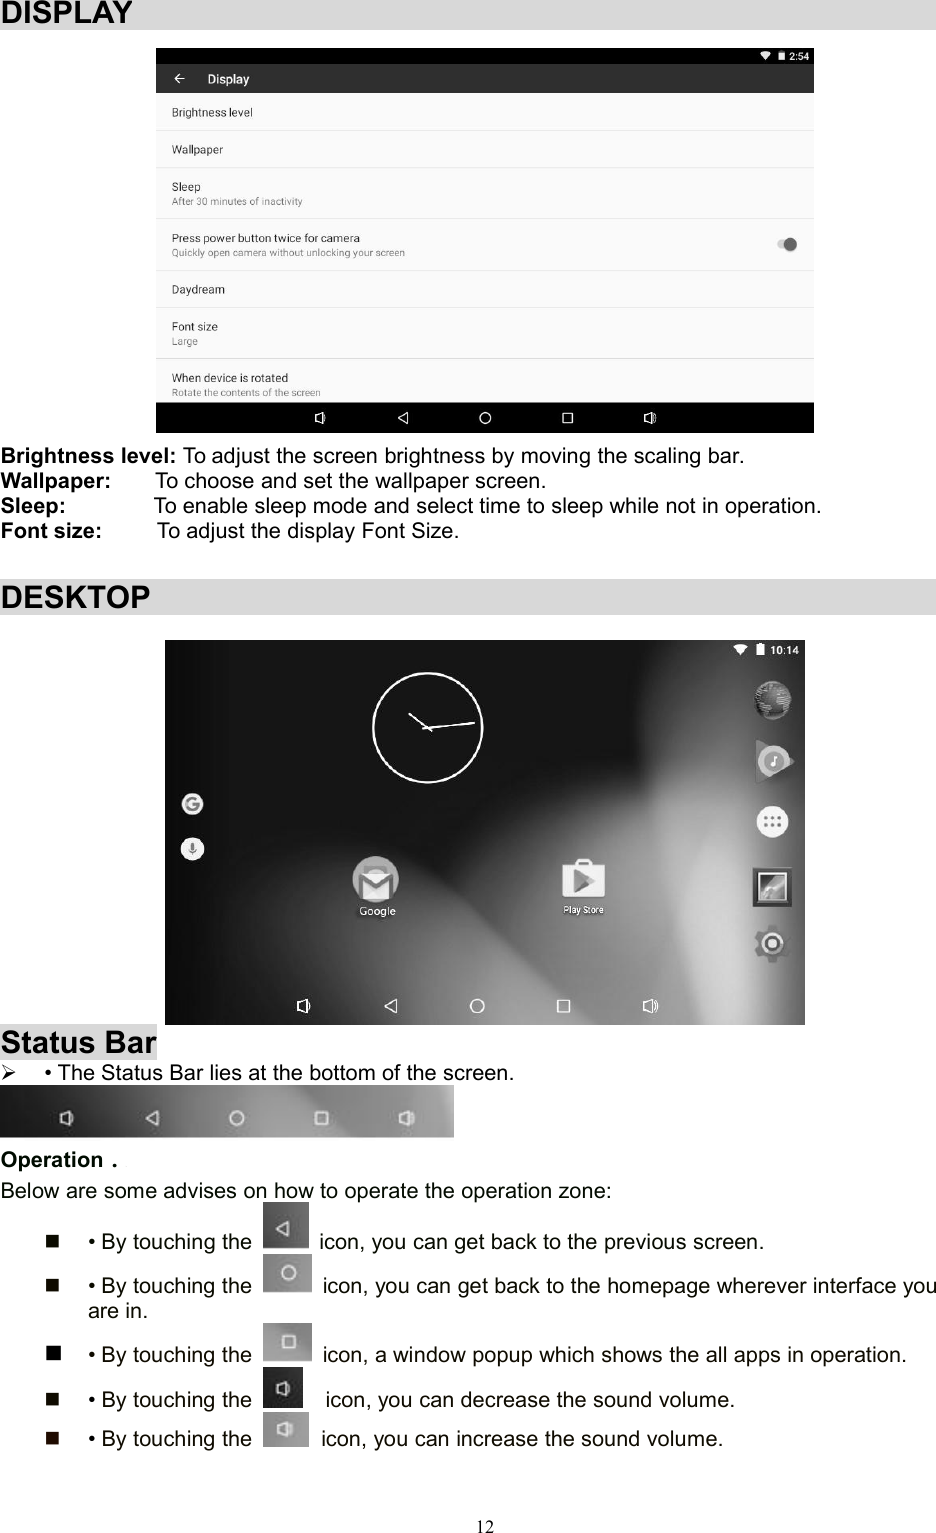 12DISPLAYBrightness level: To adjust the screen brightness by moving the scaling bar.Wallpaper: To choose and set the wallpaper screen.Sleep: To enable sleep mode and select time to sleep while not in operation.Font size: To adjust the display Font Size.DESKTOPStatus Bar• The Status Bar lies at the bottom of the screen.Operation．RBelow are some advises on how to operate the operation zone:• By touching the icon, you can get back to the previous screen.• By touching the icon, you can get back to the homepage wherever interface youare in.• By touching the icon, a window popup which shows the all apps in operation.•By touching the icon, you can decrease the sound volume.•By touching the icon, you can increase the sound volume.